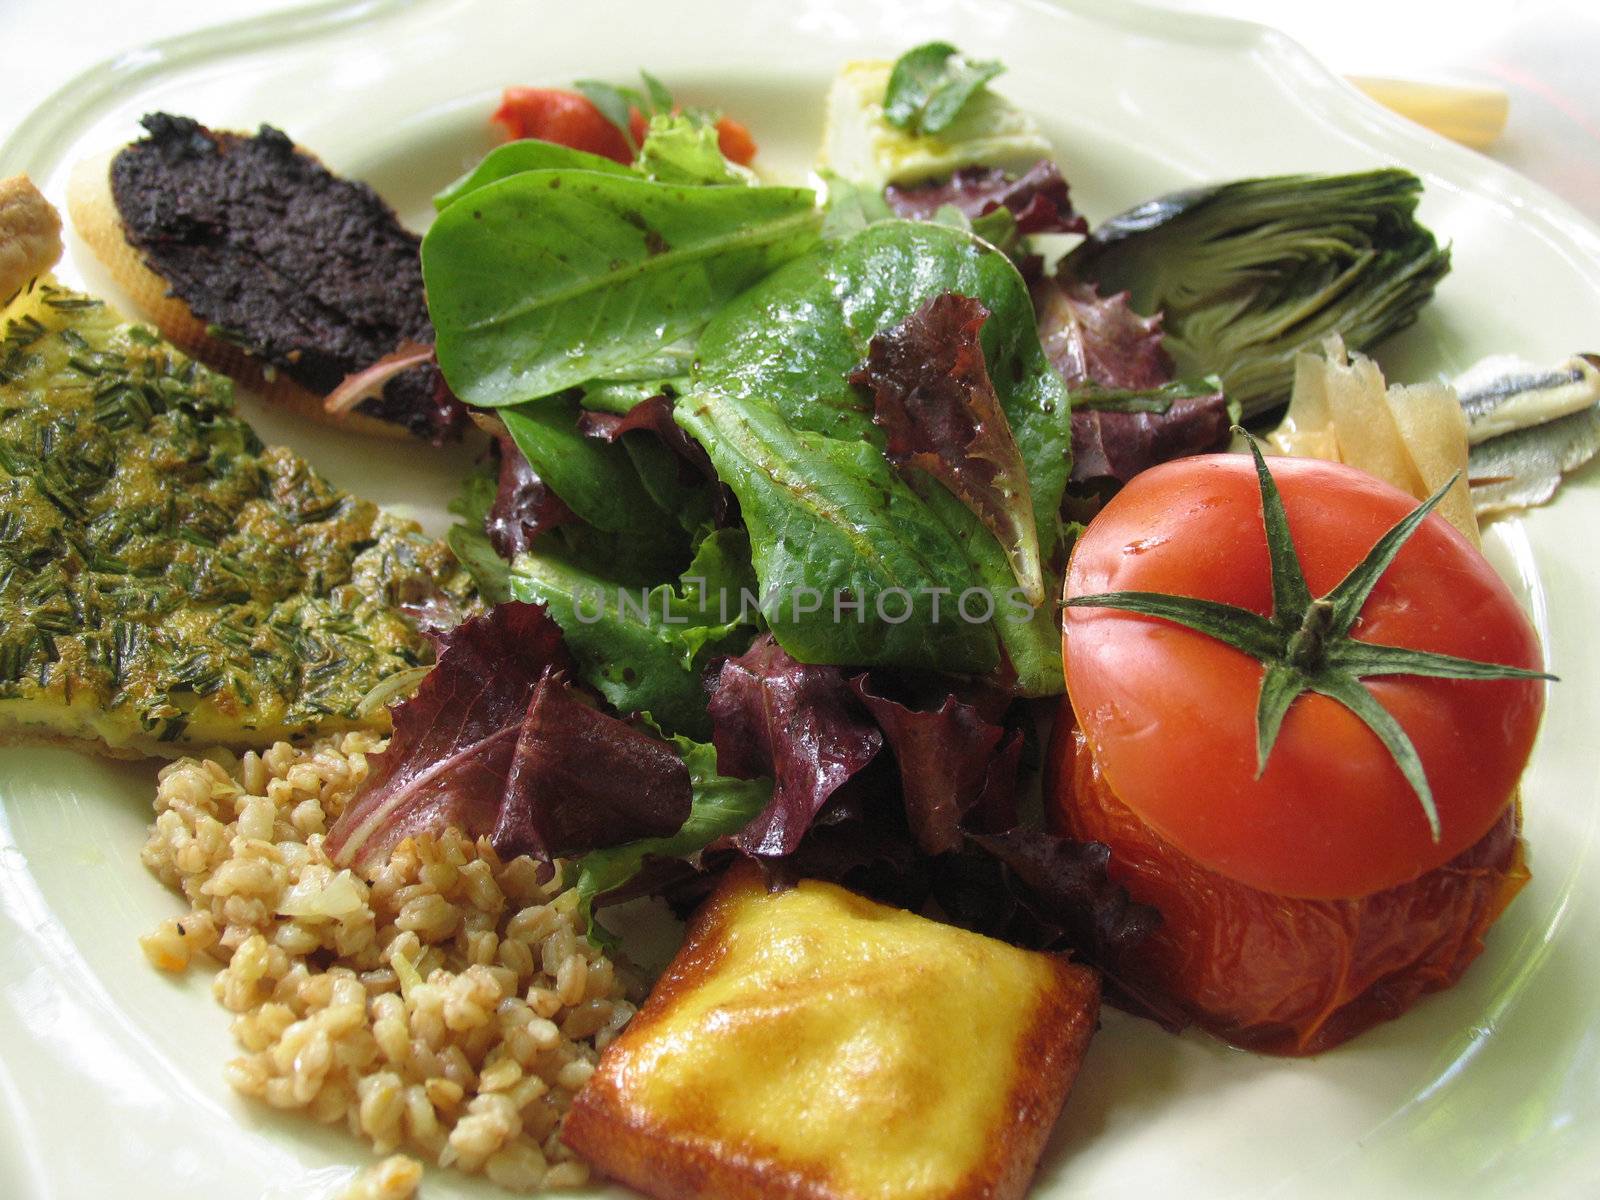 Delicious vegetarian lunch plate - Provence, France.